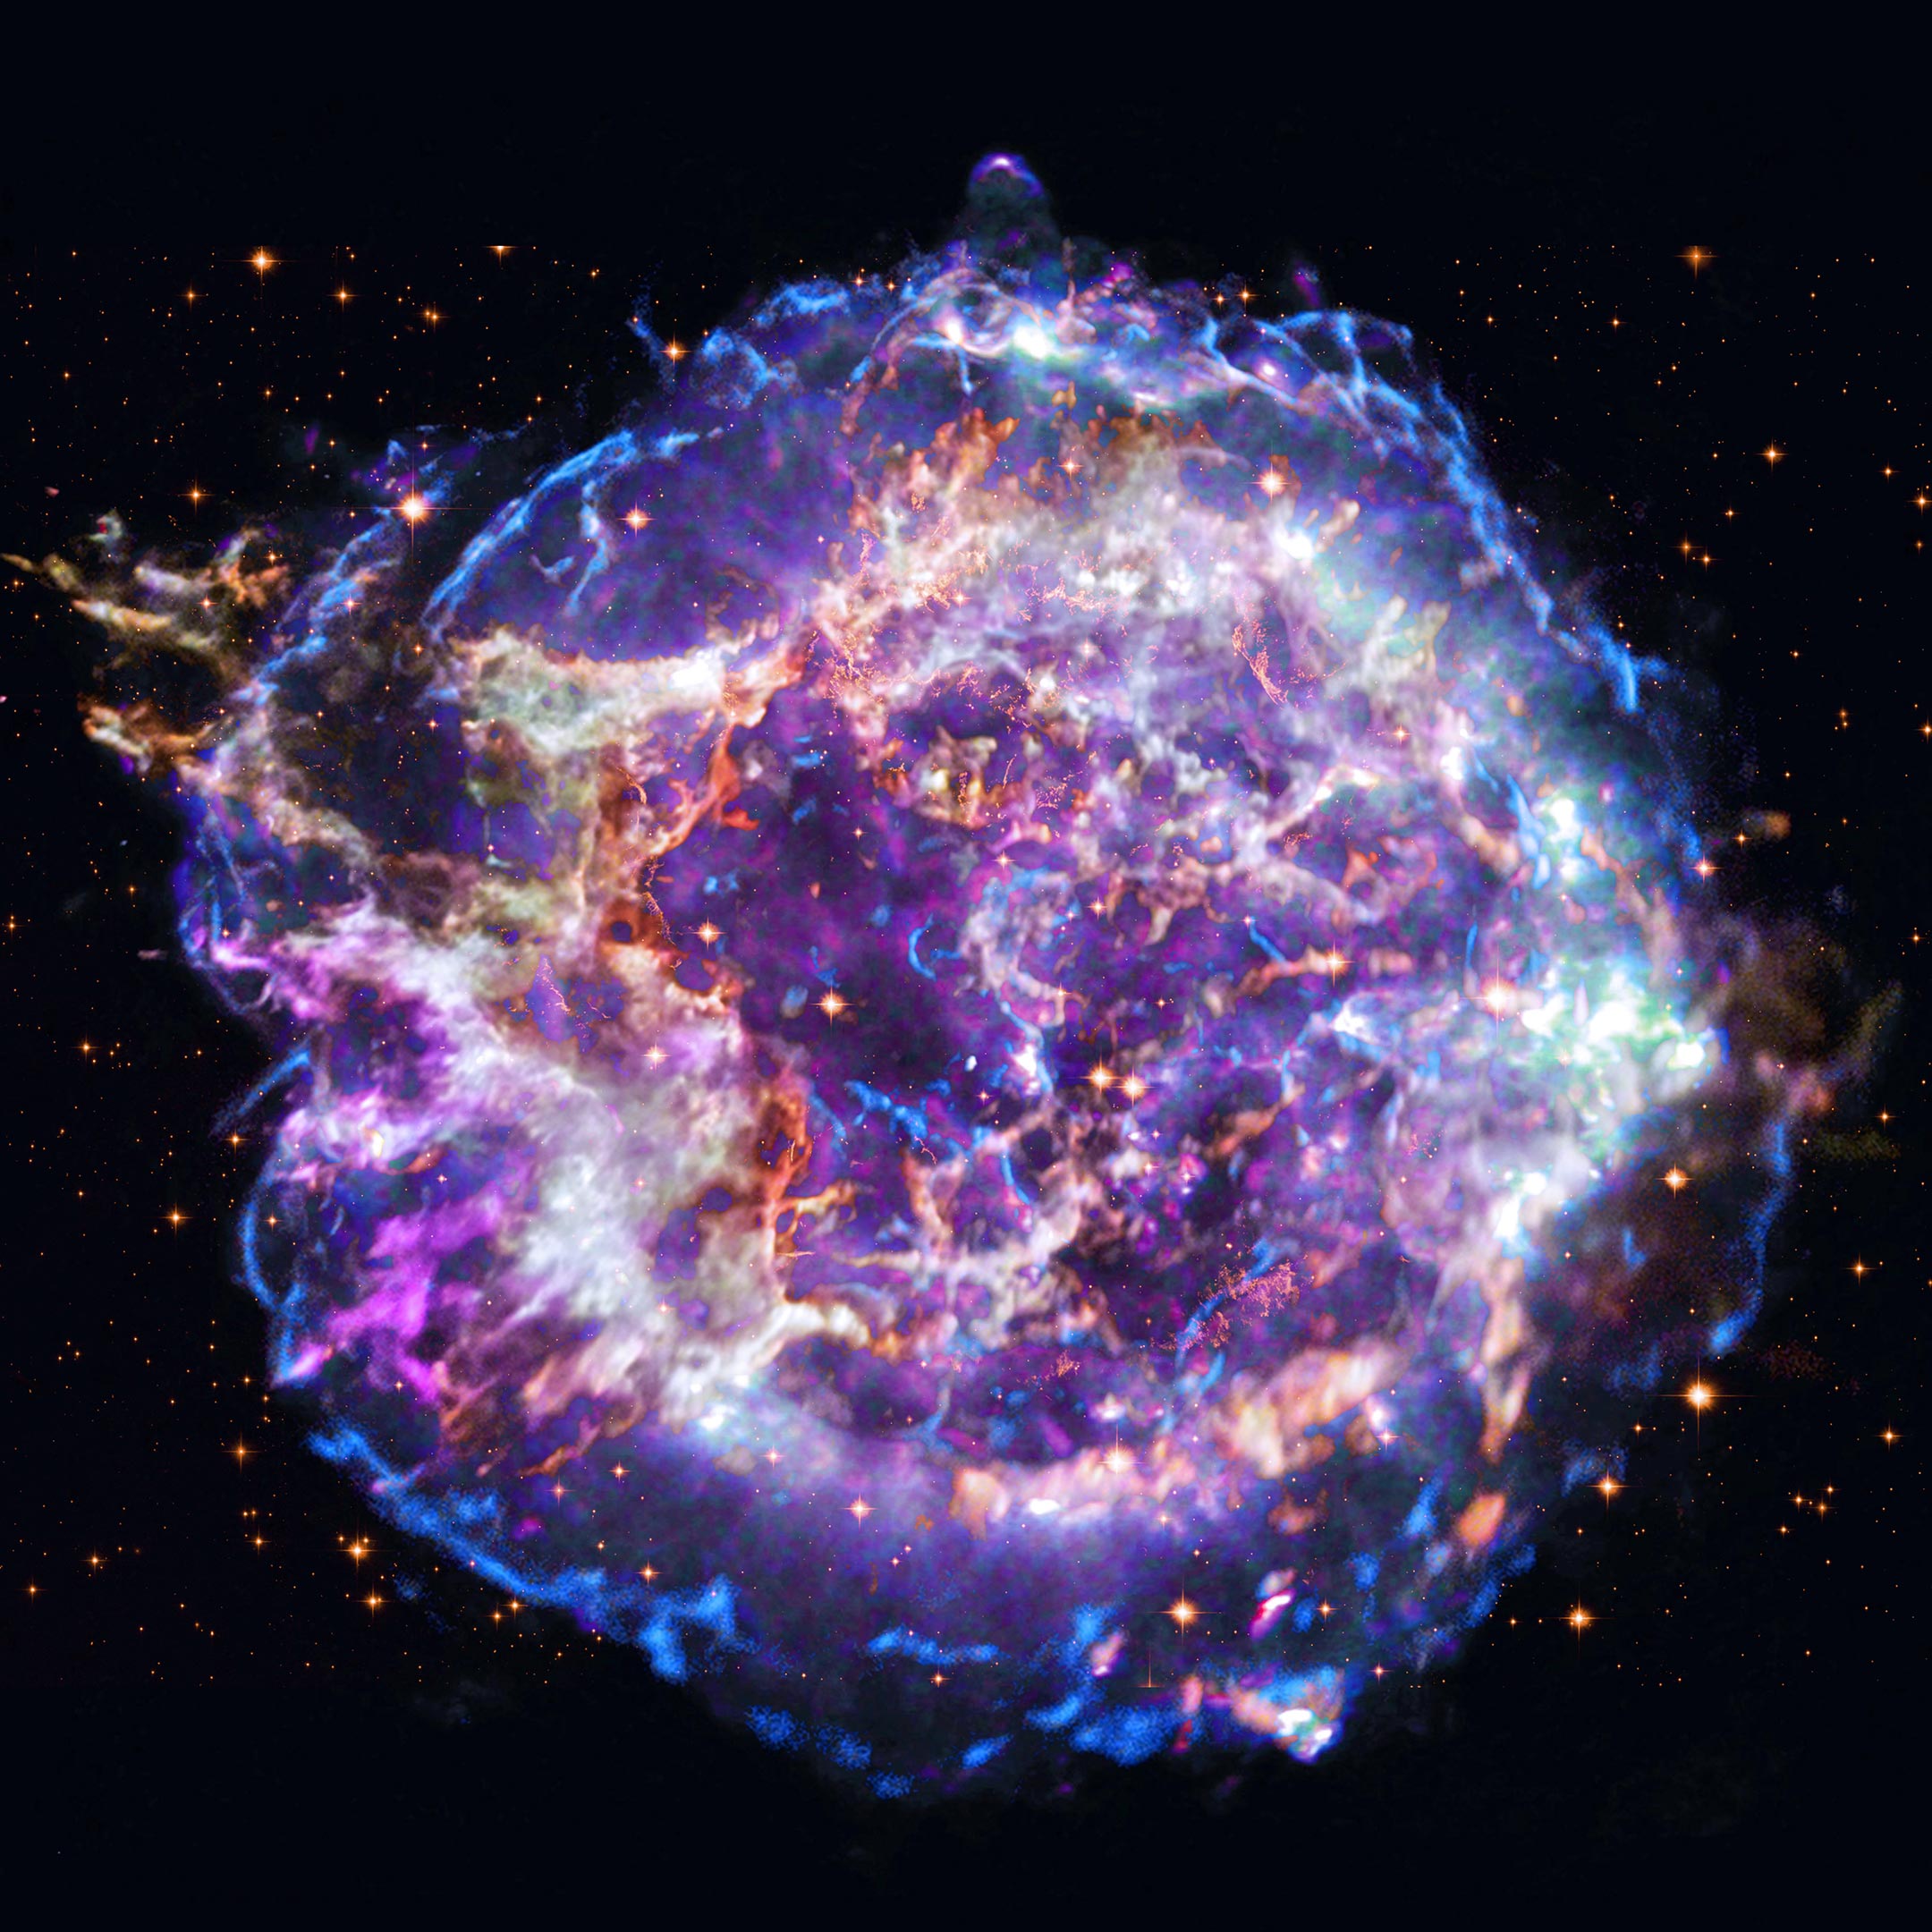 New images of Universe